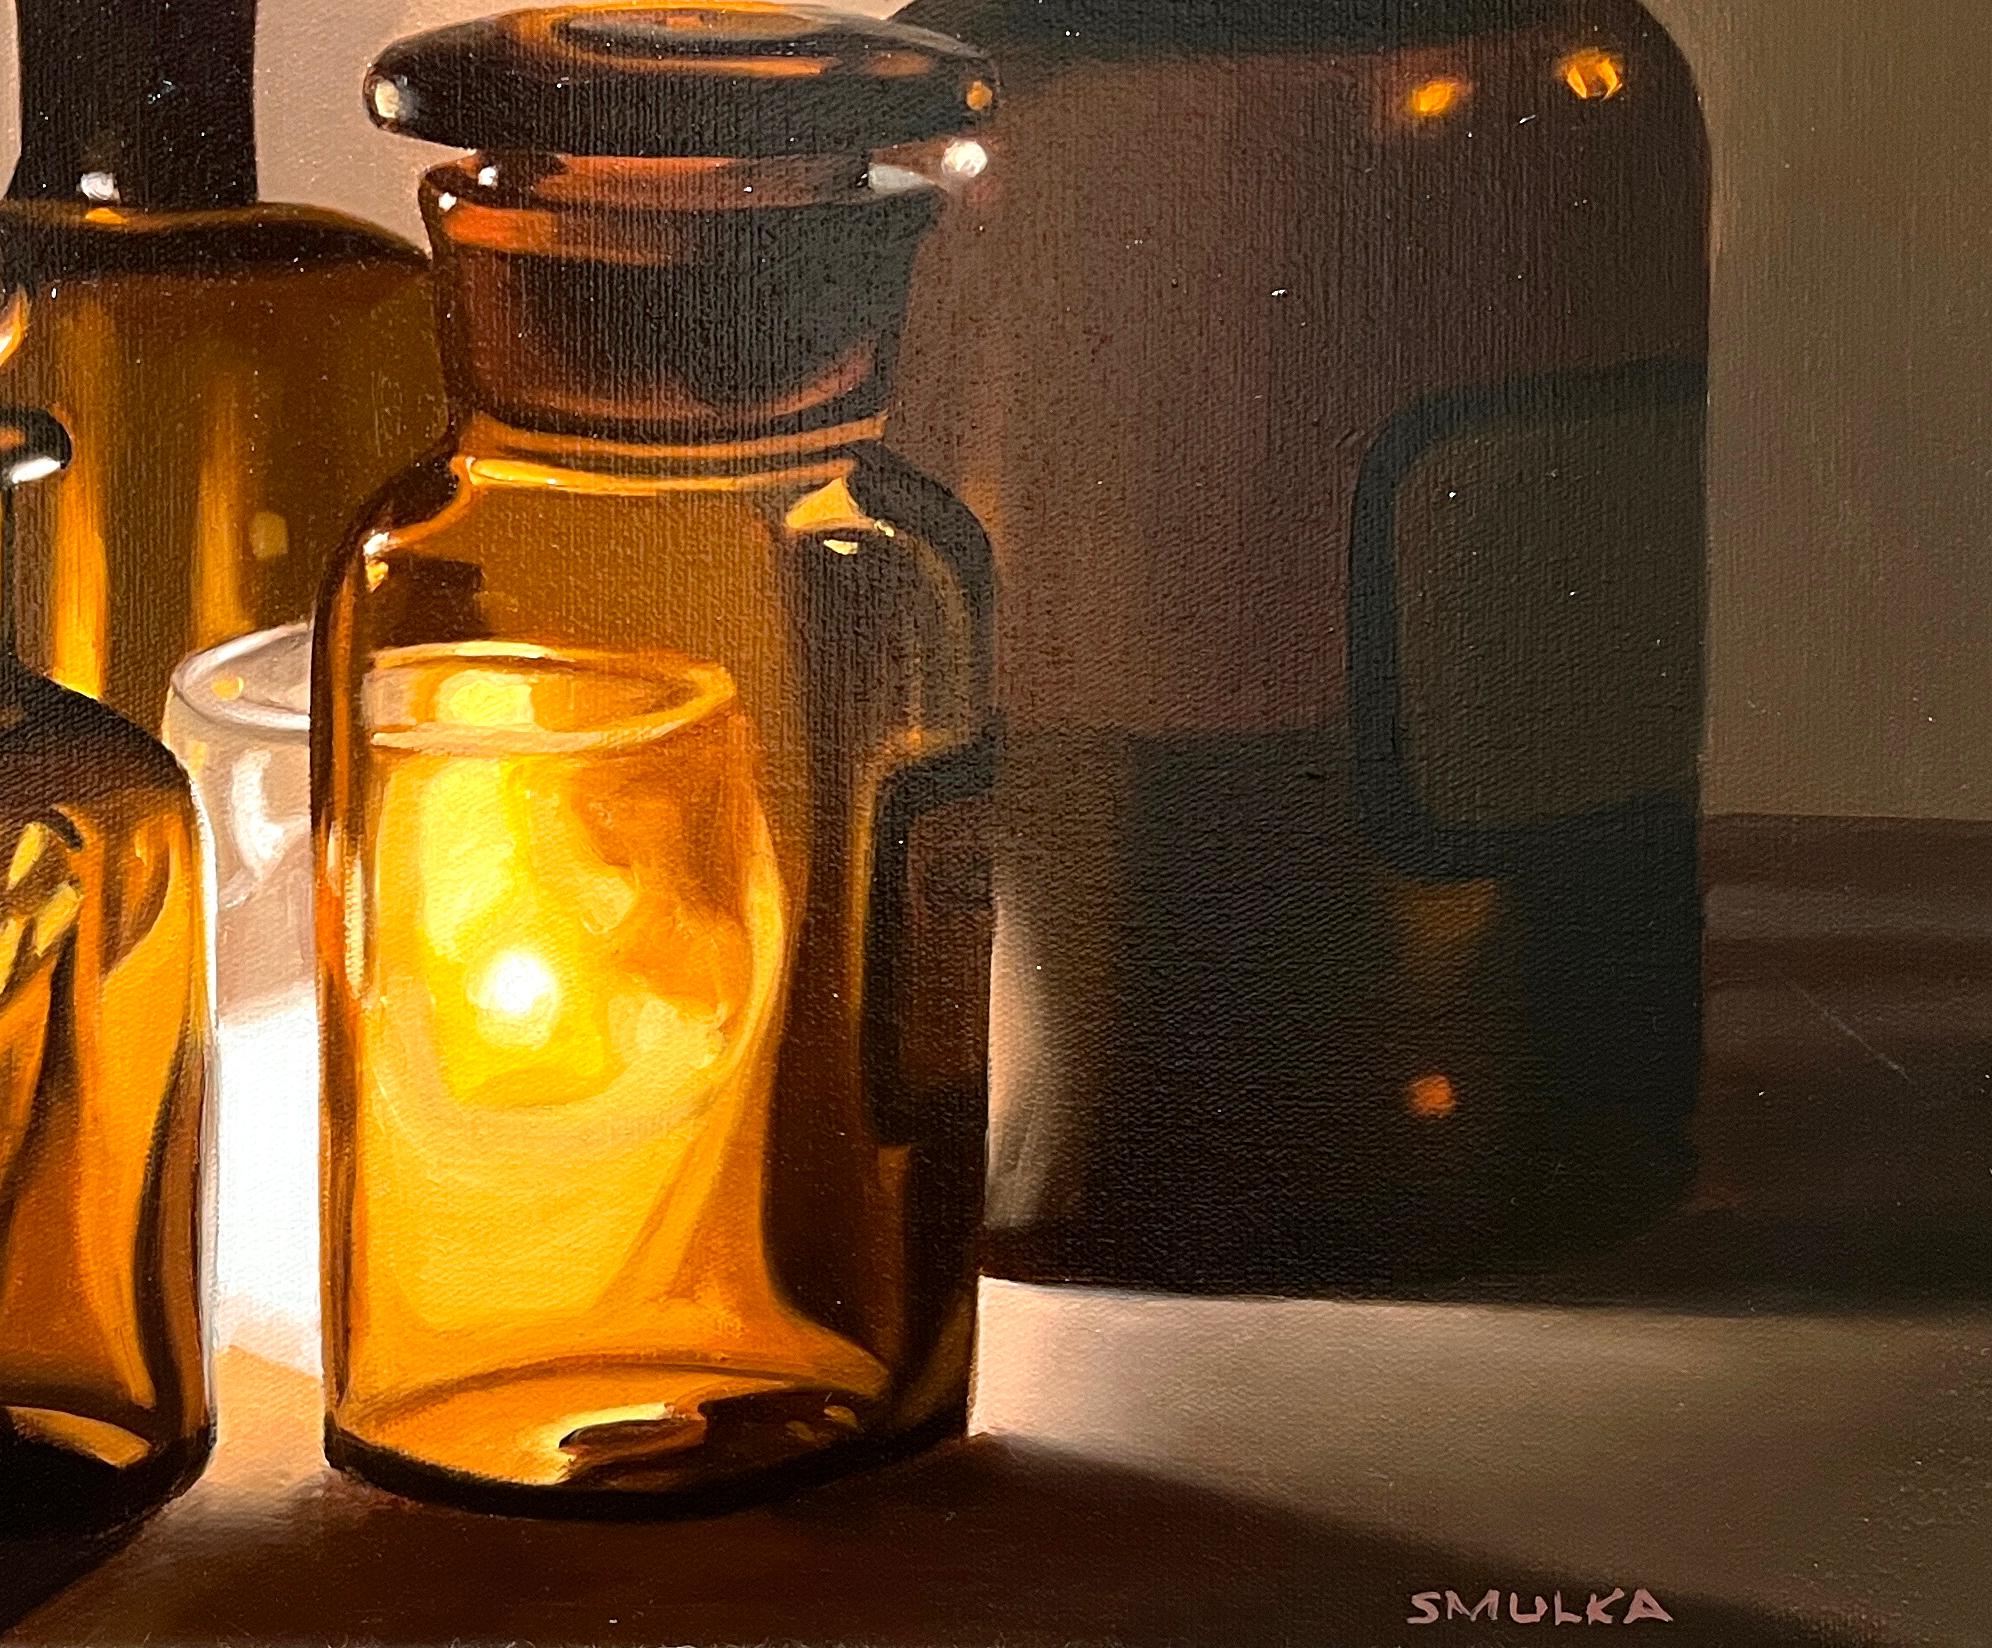 CANDLE STUDY - Photorealism / Vintage Candle Still Life / Glass Bottles - Contemporary Painting by Steve Smulka